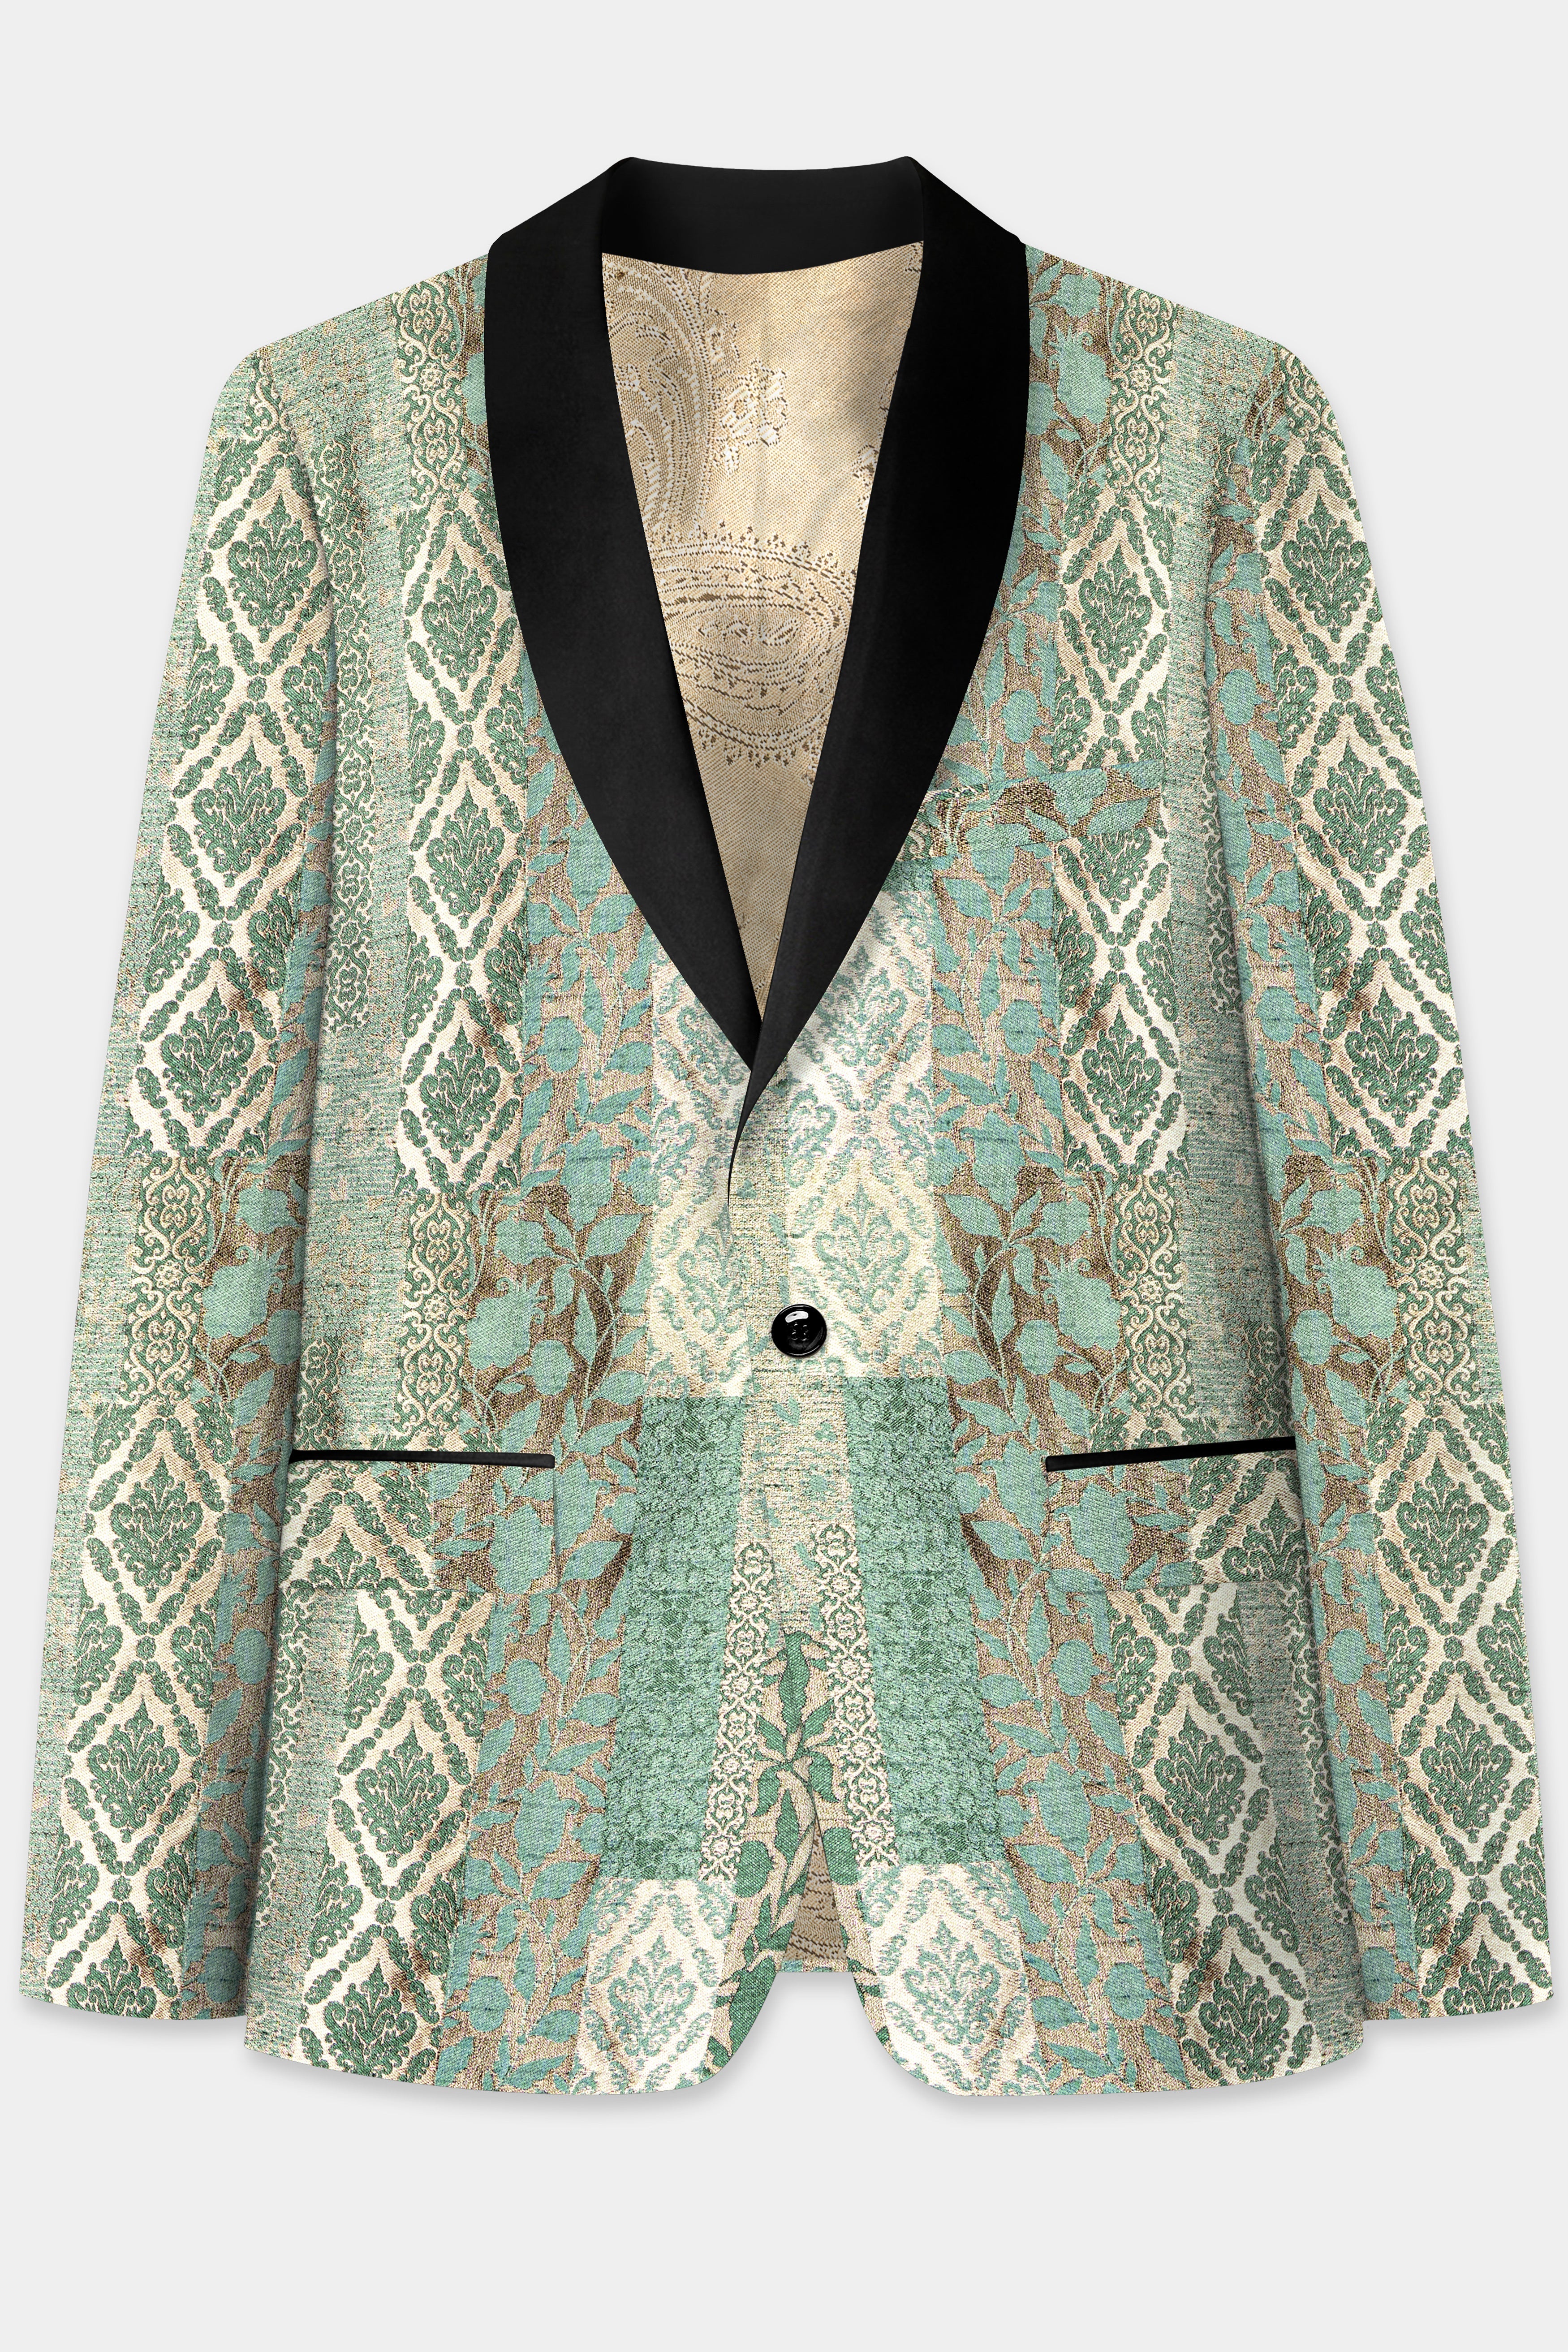 Envy Green and Opium Brown Jacquard Weave Tuxedo Blazer BL3697-BKL-36, BL3697-BKL-38, BL3697-BKL-40, BL3697-BKL-42, BL3697-BKL-44, BL3697-BKL-46, BL3697-BKL-48, BL3697-BKL-50, BL3697-BKL-52, BL3697-BKL-54, BL3697-BKL-56, BL3697-BKL-58, BL3697-BKL-60